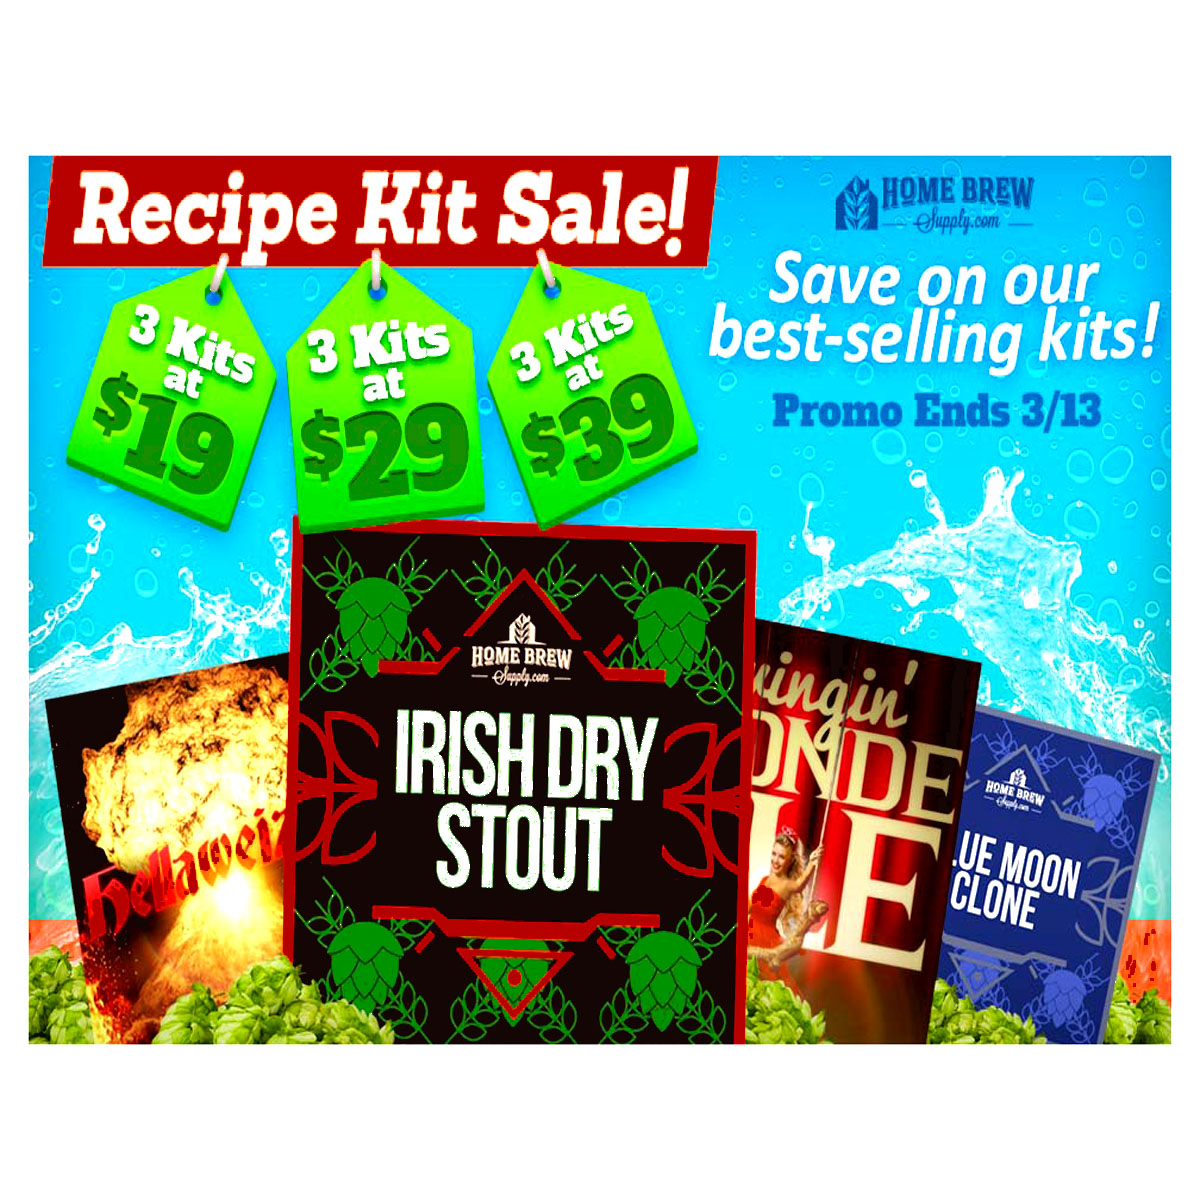  Coupon Code For Homebrew Recipe Promotion - 5 Gallon Beer Kits as low as $19 Coupon Code